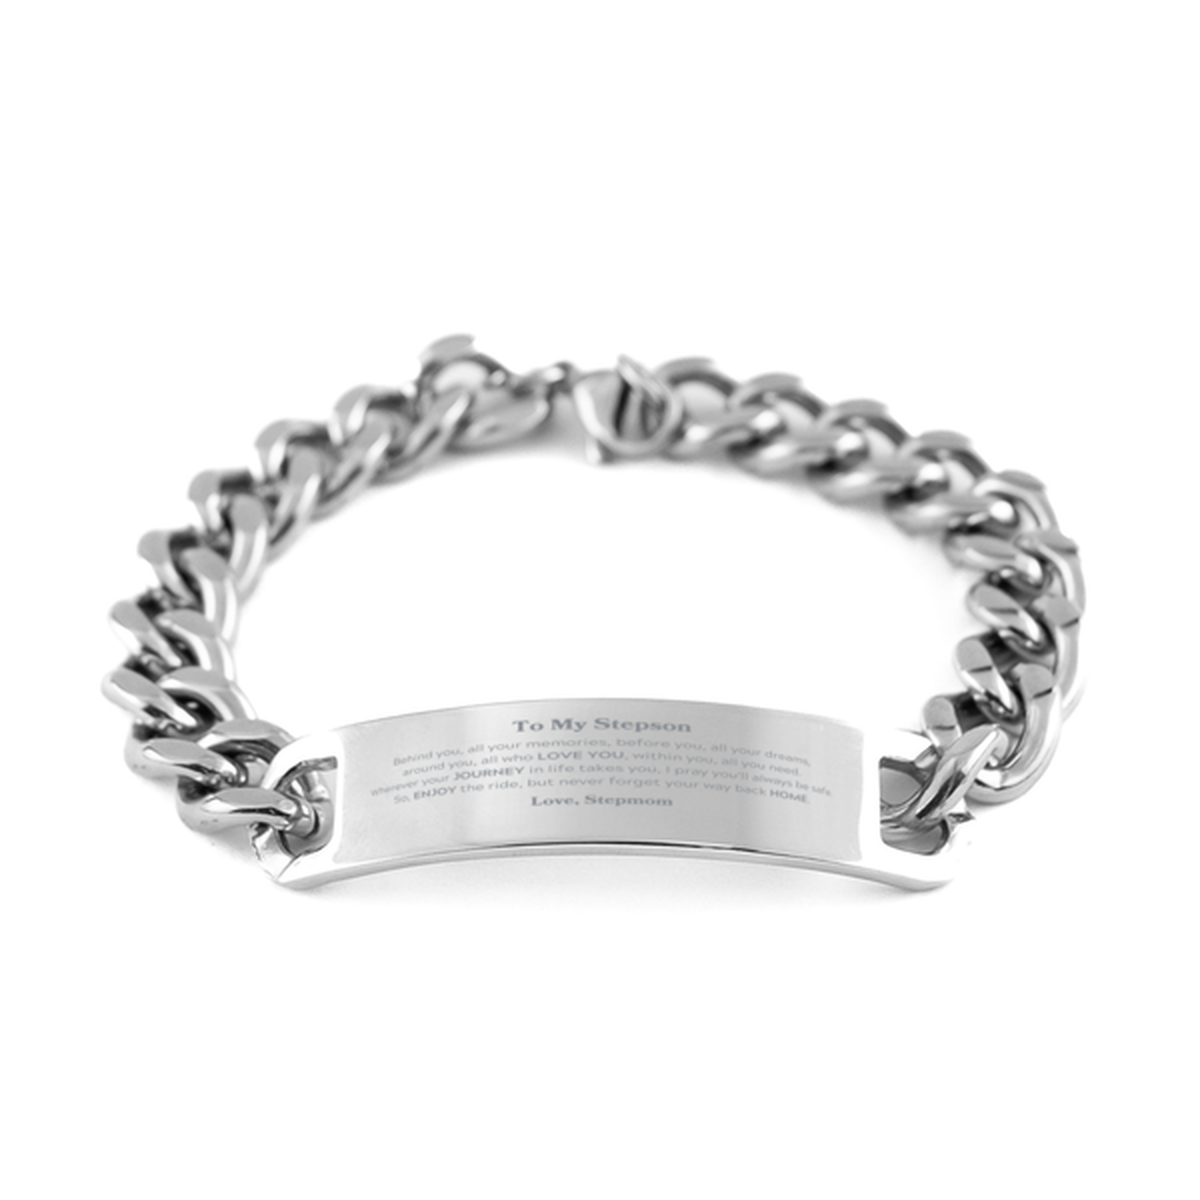 To My Stepson Graduation Gifts from Stepmom, Stepson Cuban Chain Stainless Steel Bracelet Christmas Birthday Gifts for Stepson Behind you, all your memories, before you, all your dreams. Love, Stepmom